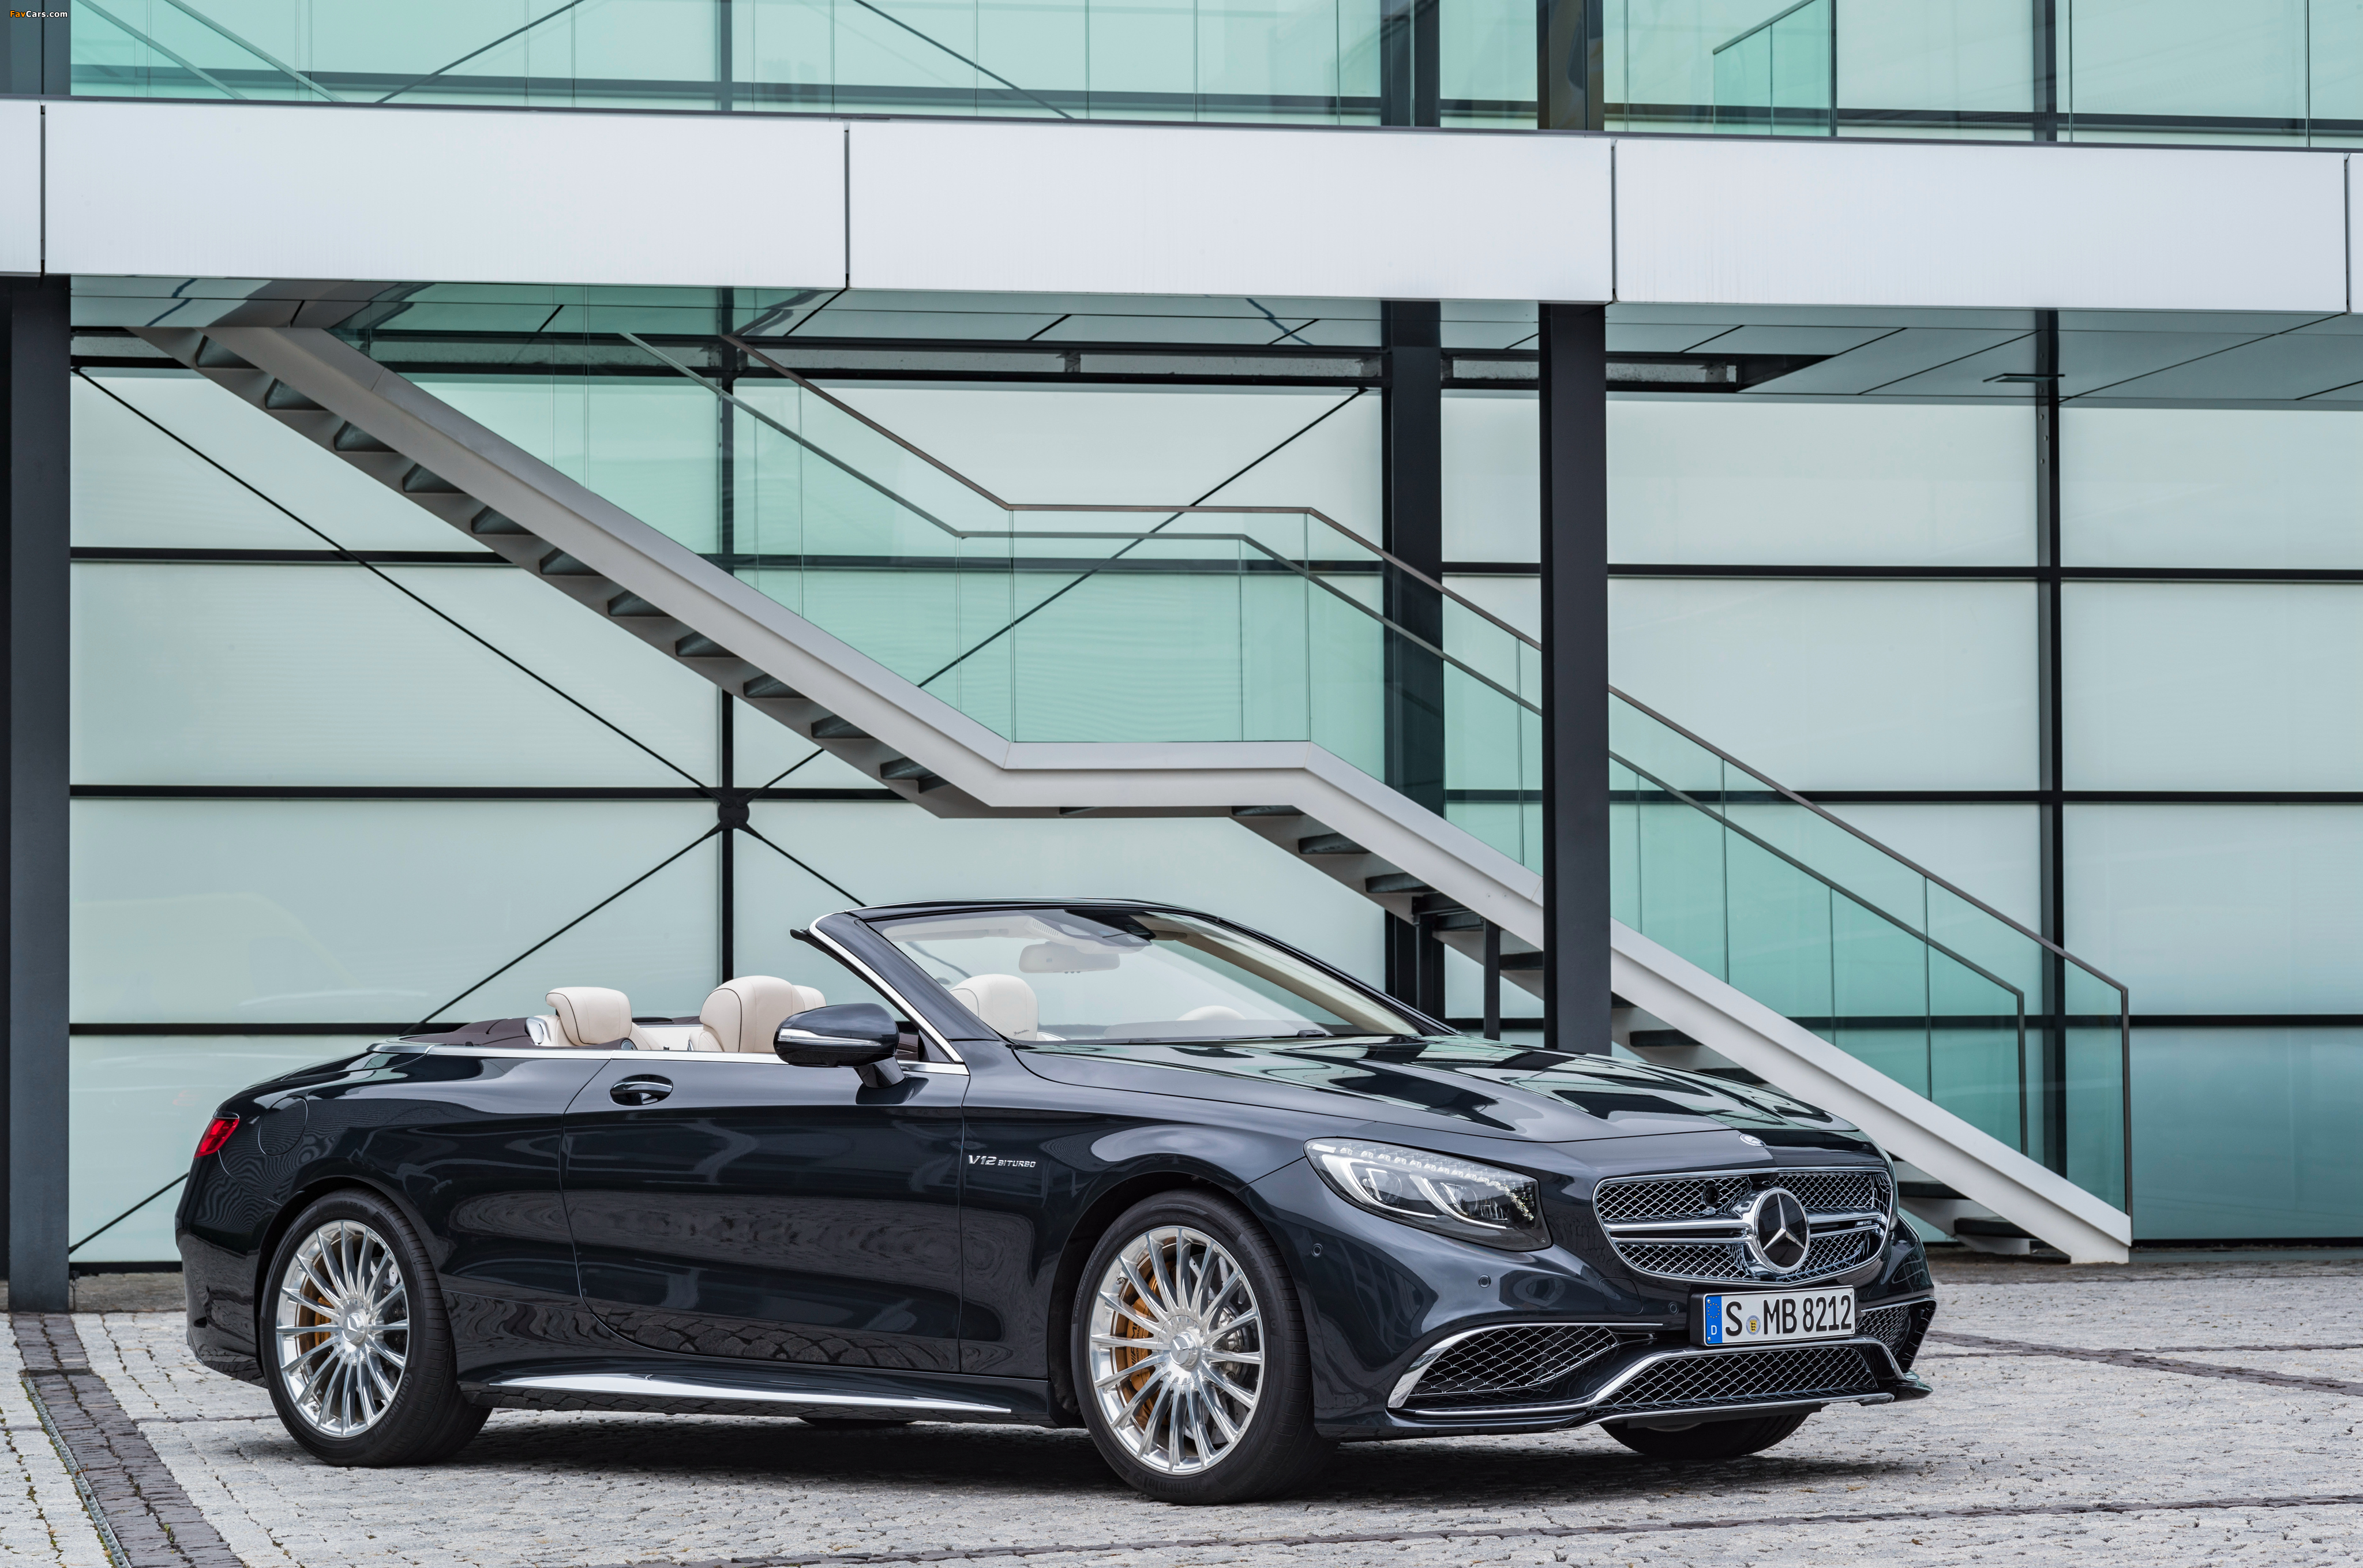 Mercedes-AMG S 65 Cabriolet (A217) 2016 images (4096 x 2718)